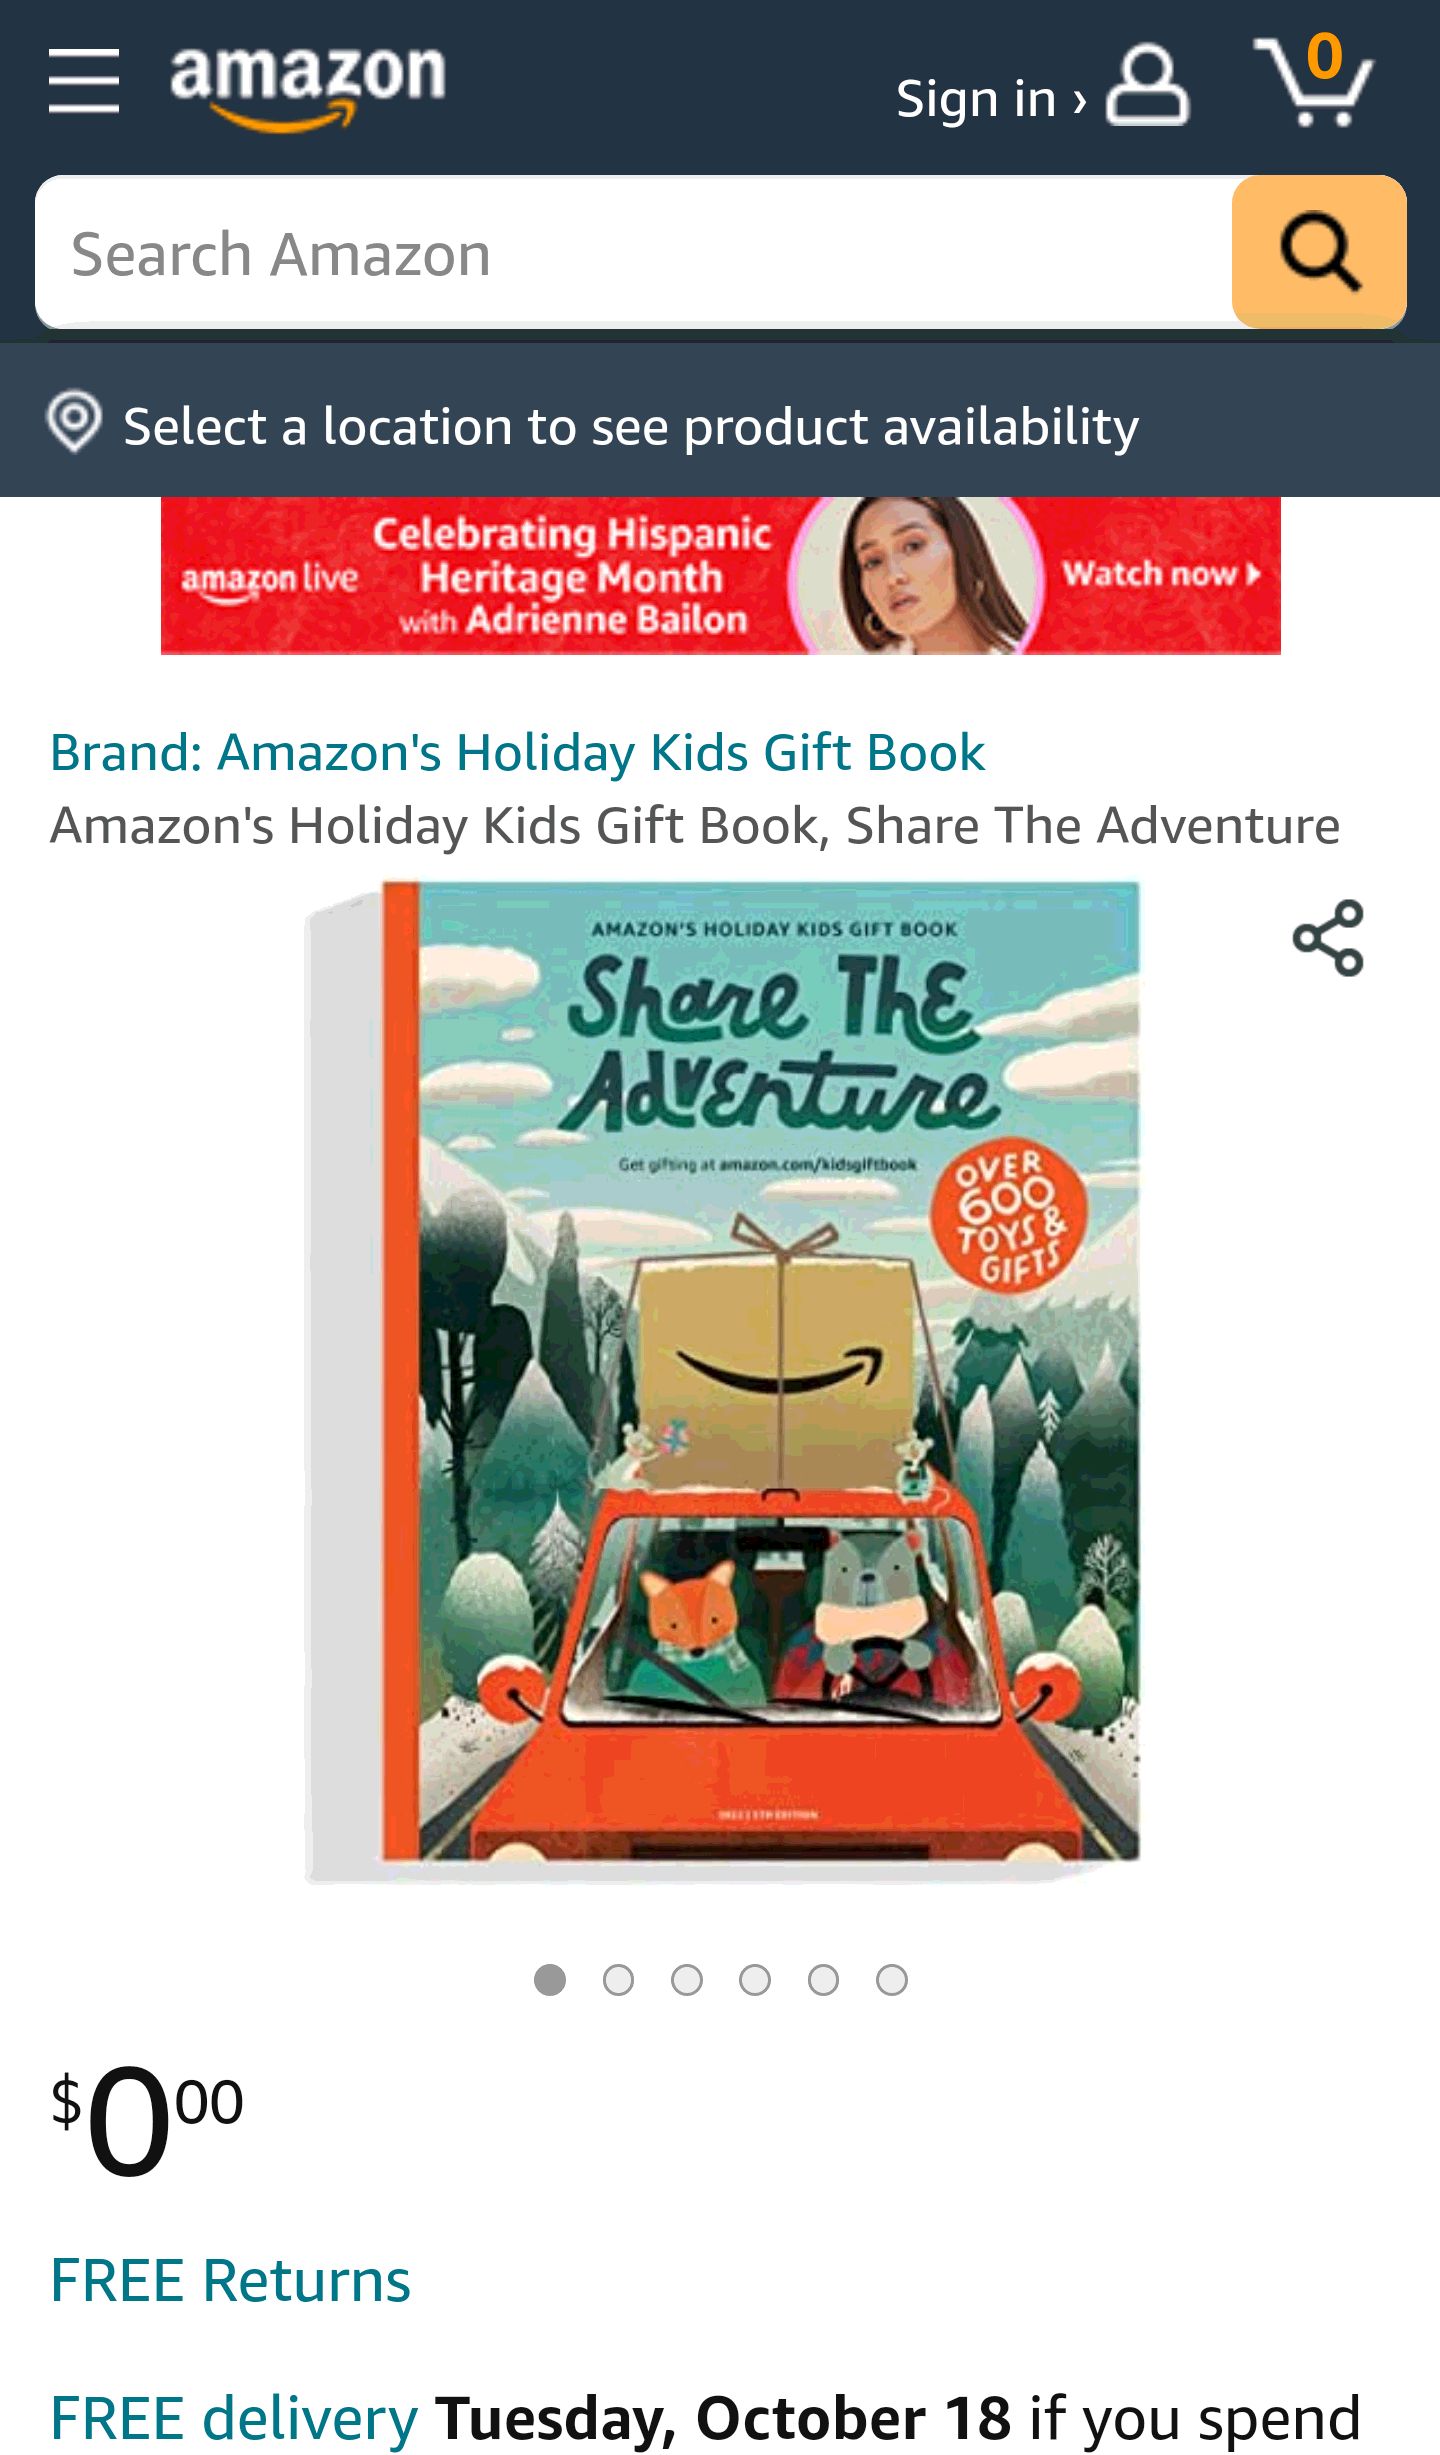 Amazon's Holiday Kids Gift Book, Share The Adventure : Toys & Games